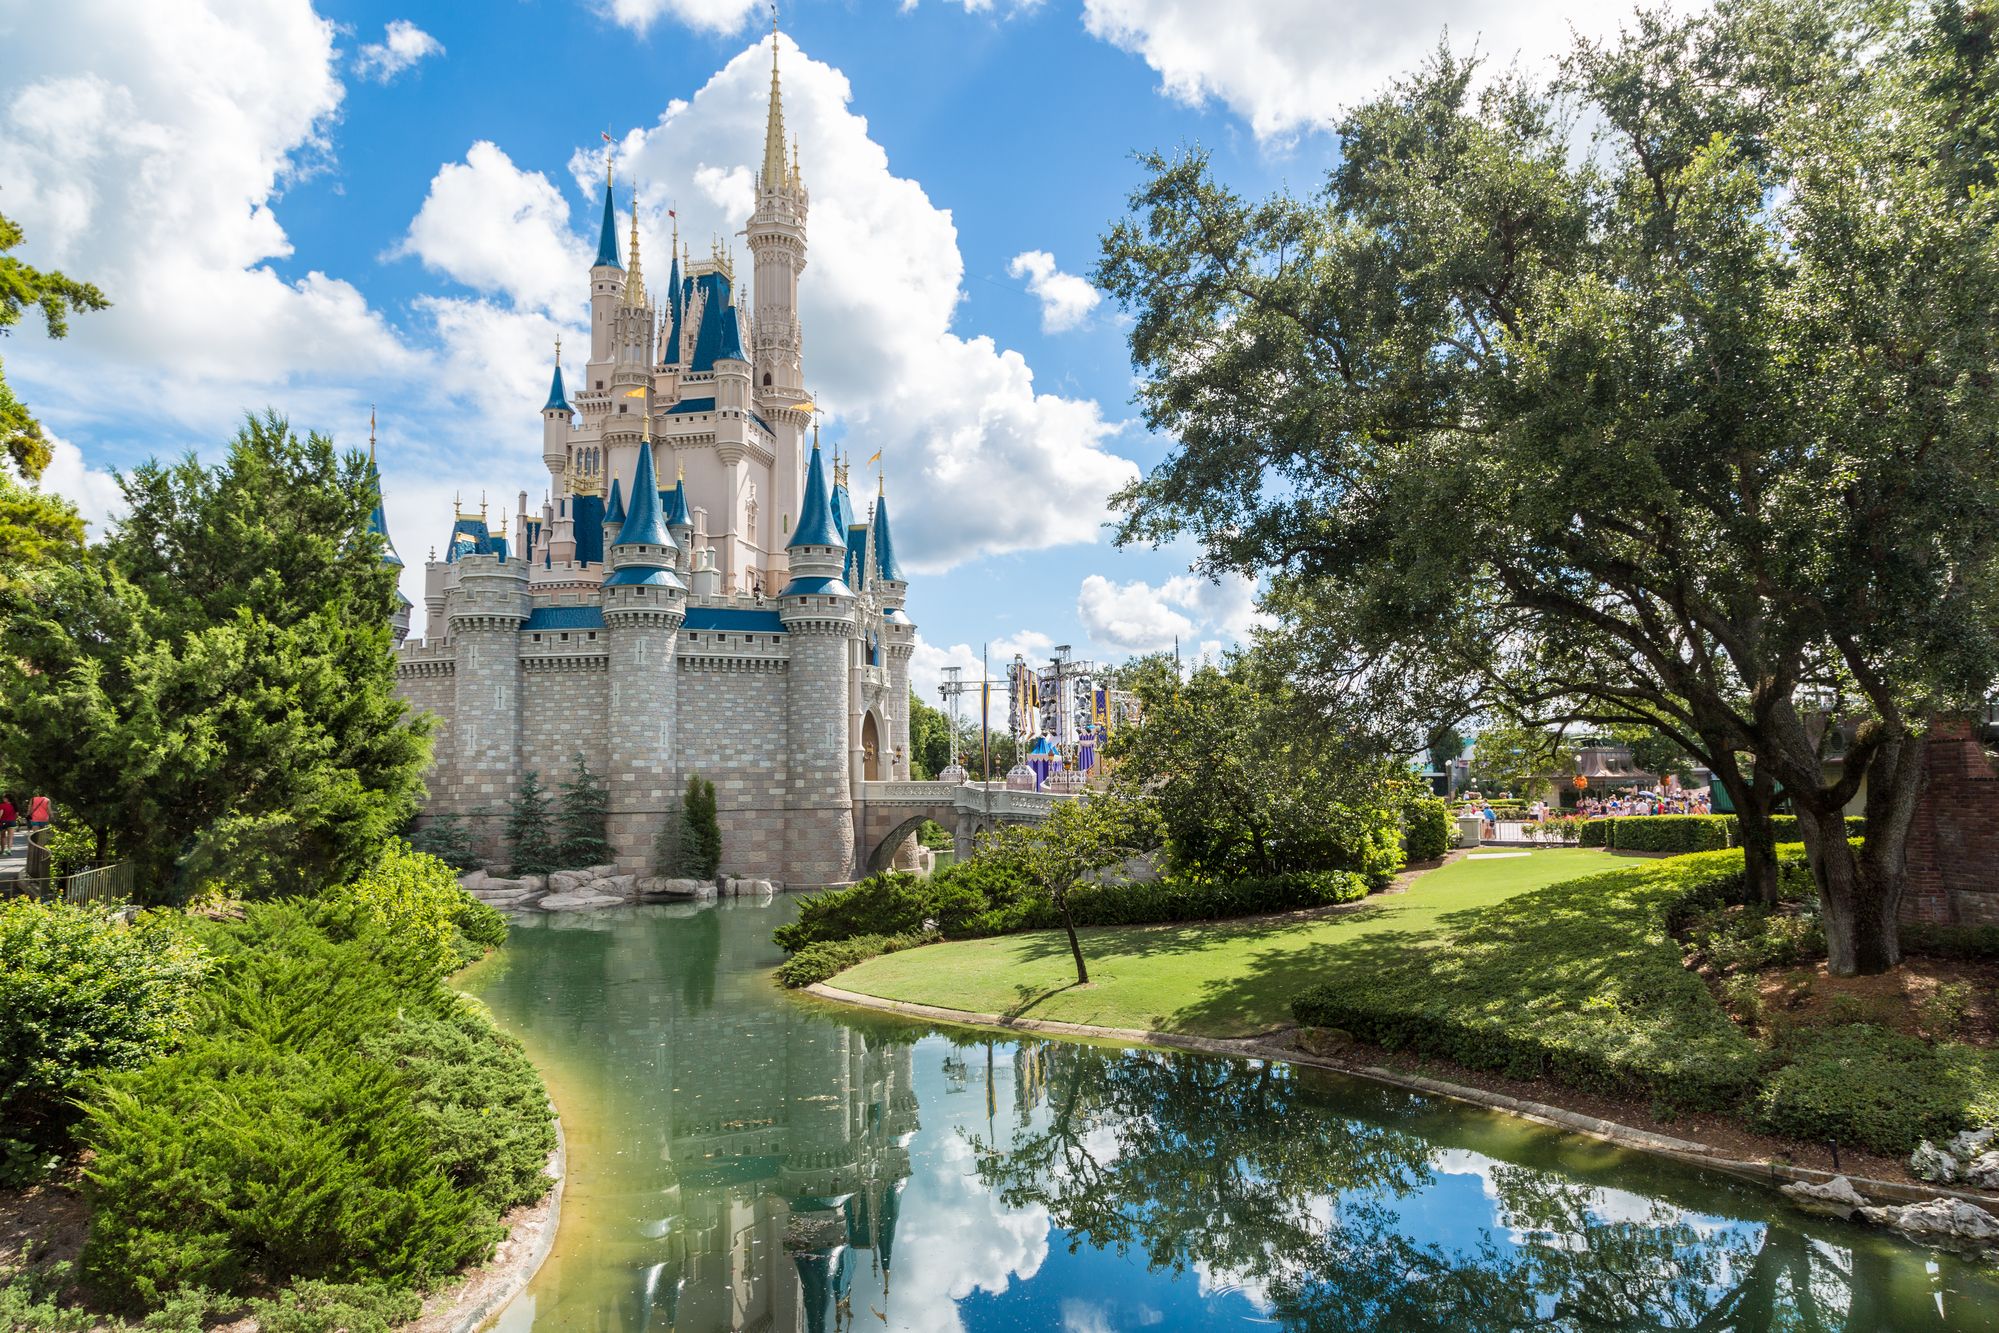 Orlando, Florida – Sept 4: The famous Disney Magic Kingdom Castle and its mirror reflection on the calm waters surrounding the castle in Orlando, Florida, on September 4, 2014